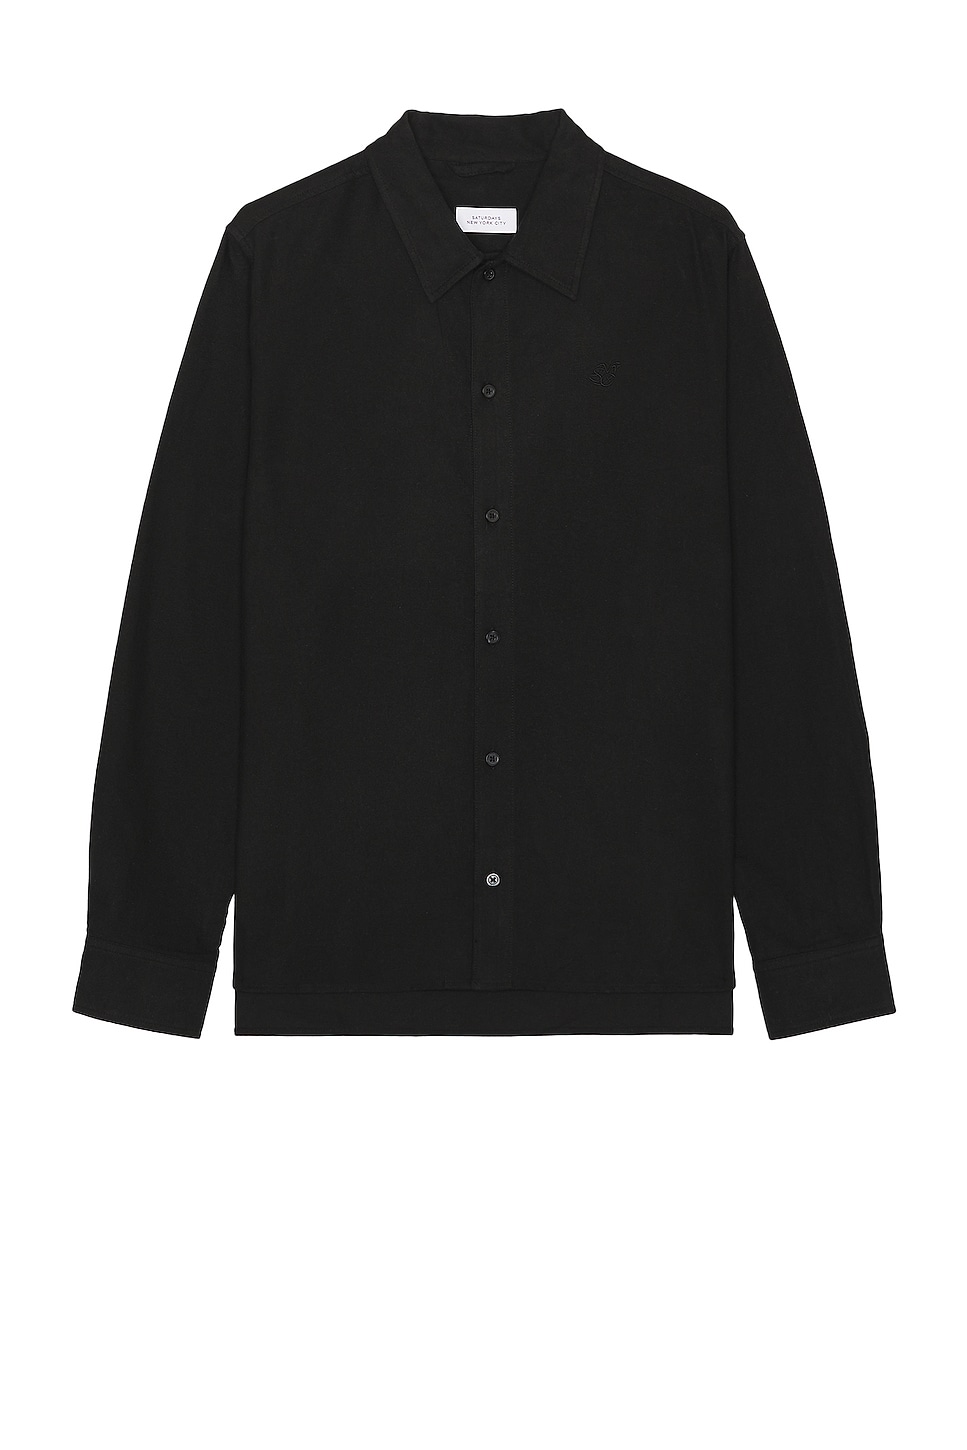 Image 1 of SATURDAYS NYC Broome Flannel Shirt in Black